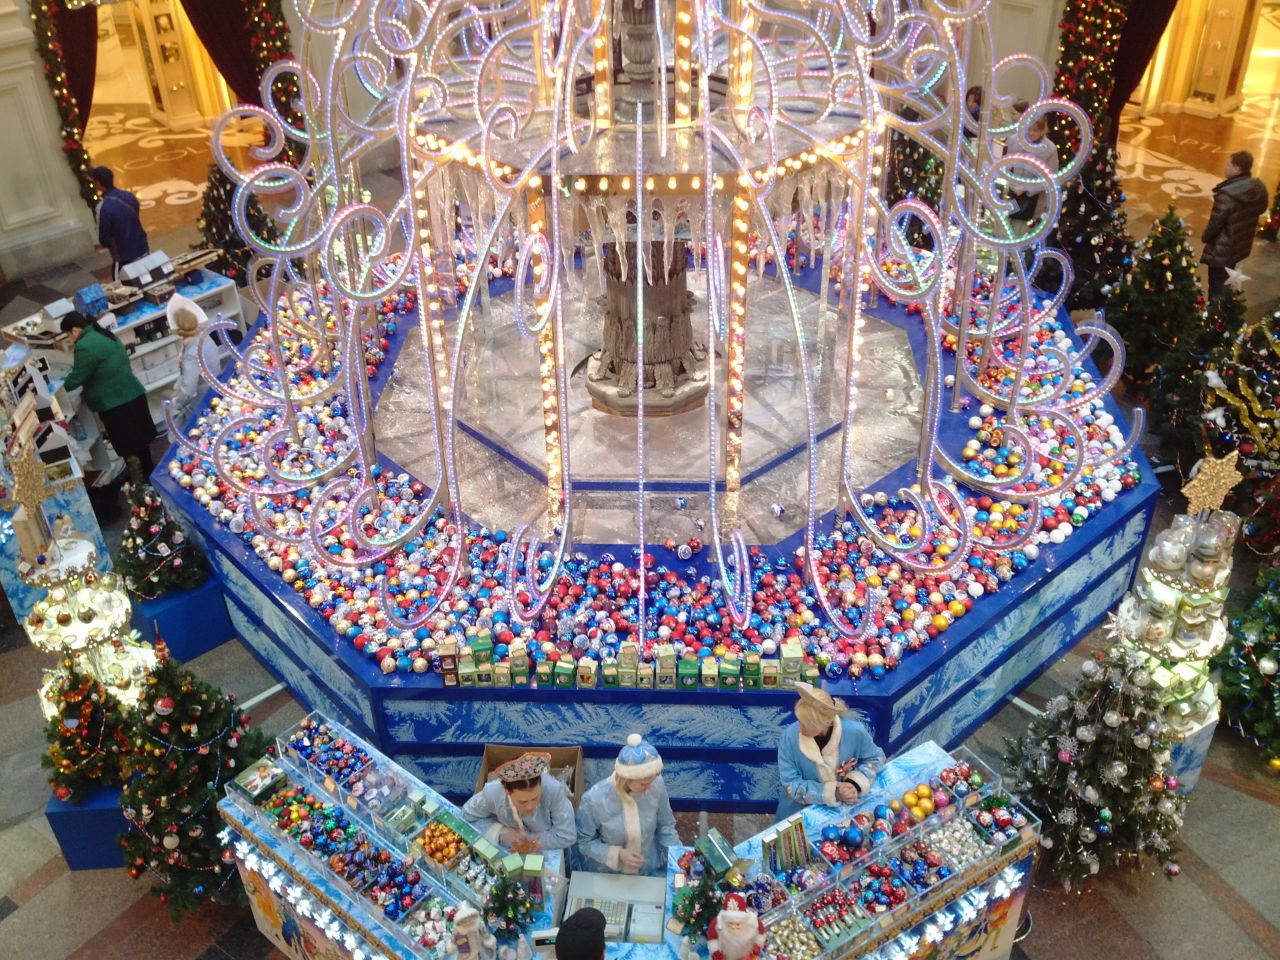 <a href="http://ireport.cnn.com/docs/DOC-1067293" target="_blank">Victoria Agronskaya</a> discovered this beautifully decorated fountain in the GUM department store in Moscow, Russia. "The GUM fountain is the most famous fountain in Moscow," Victoria explains. This year, the water has been replaced with Christmas toys and there is a small Christmas market surrounding it.